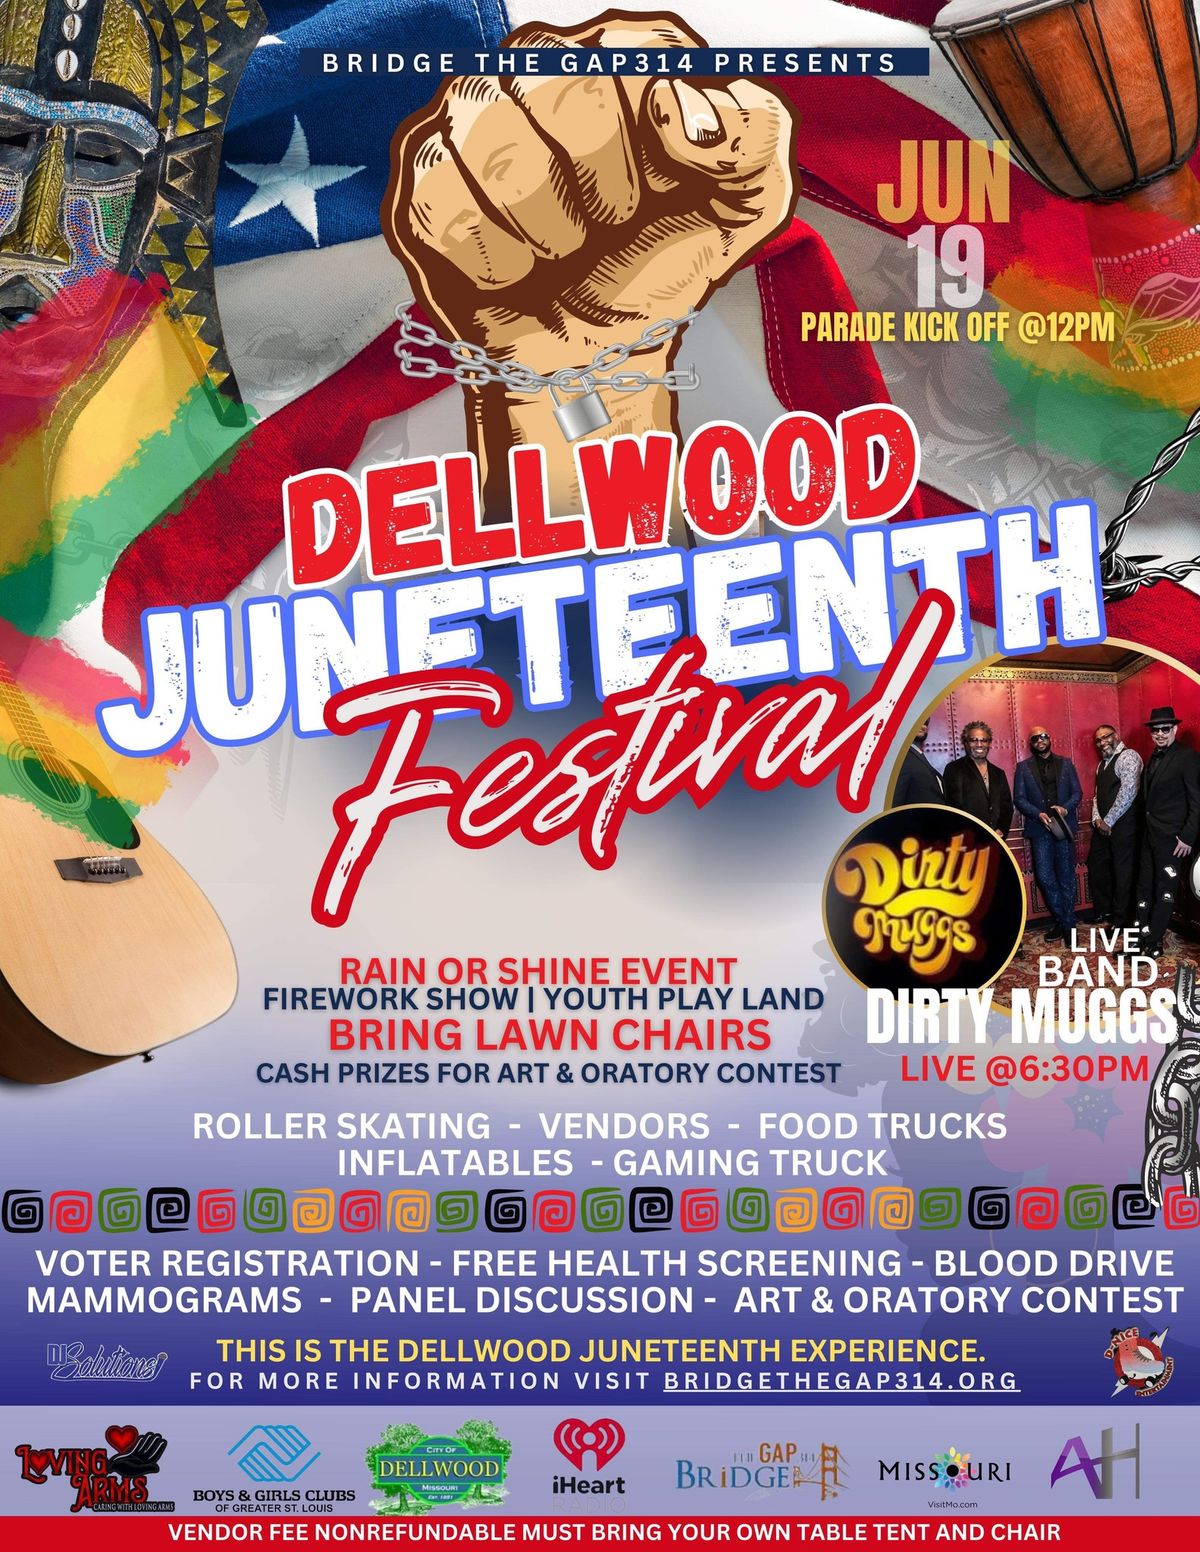 The City of Dellwood Juneteenth Festival 